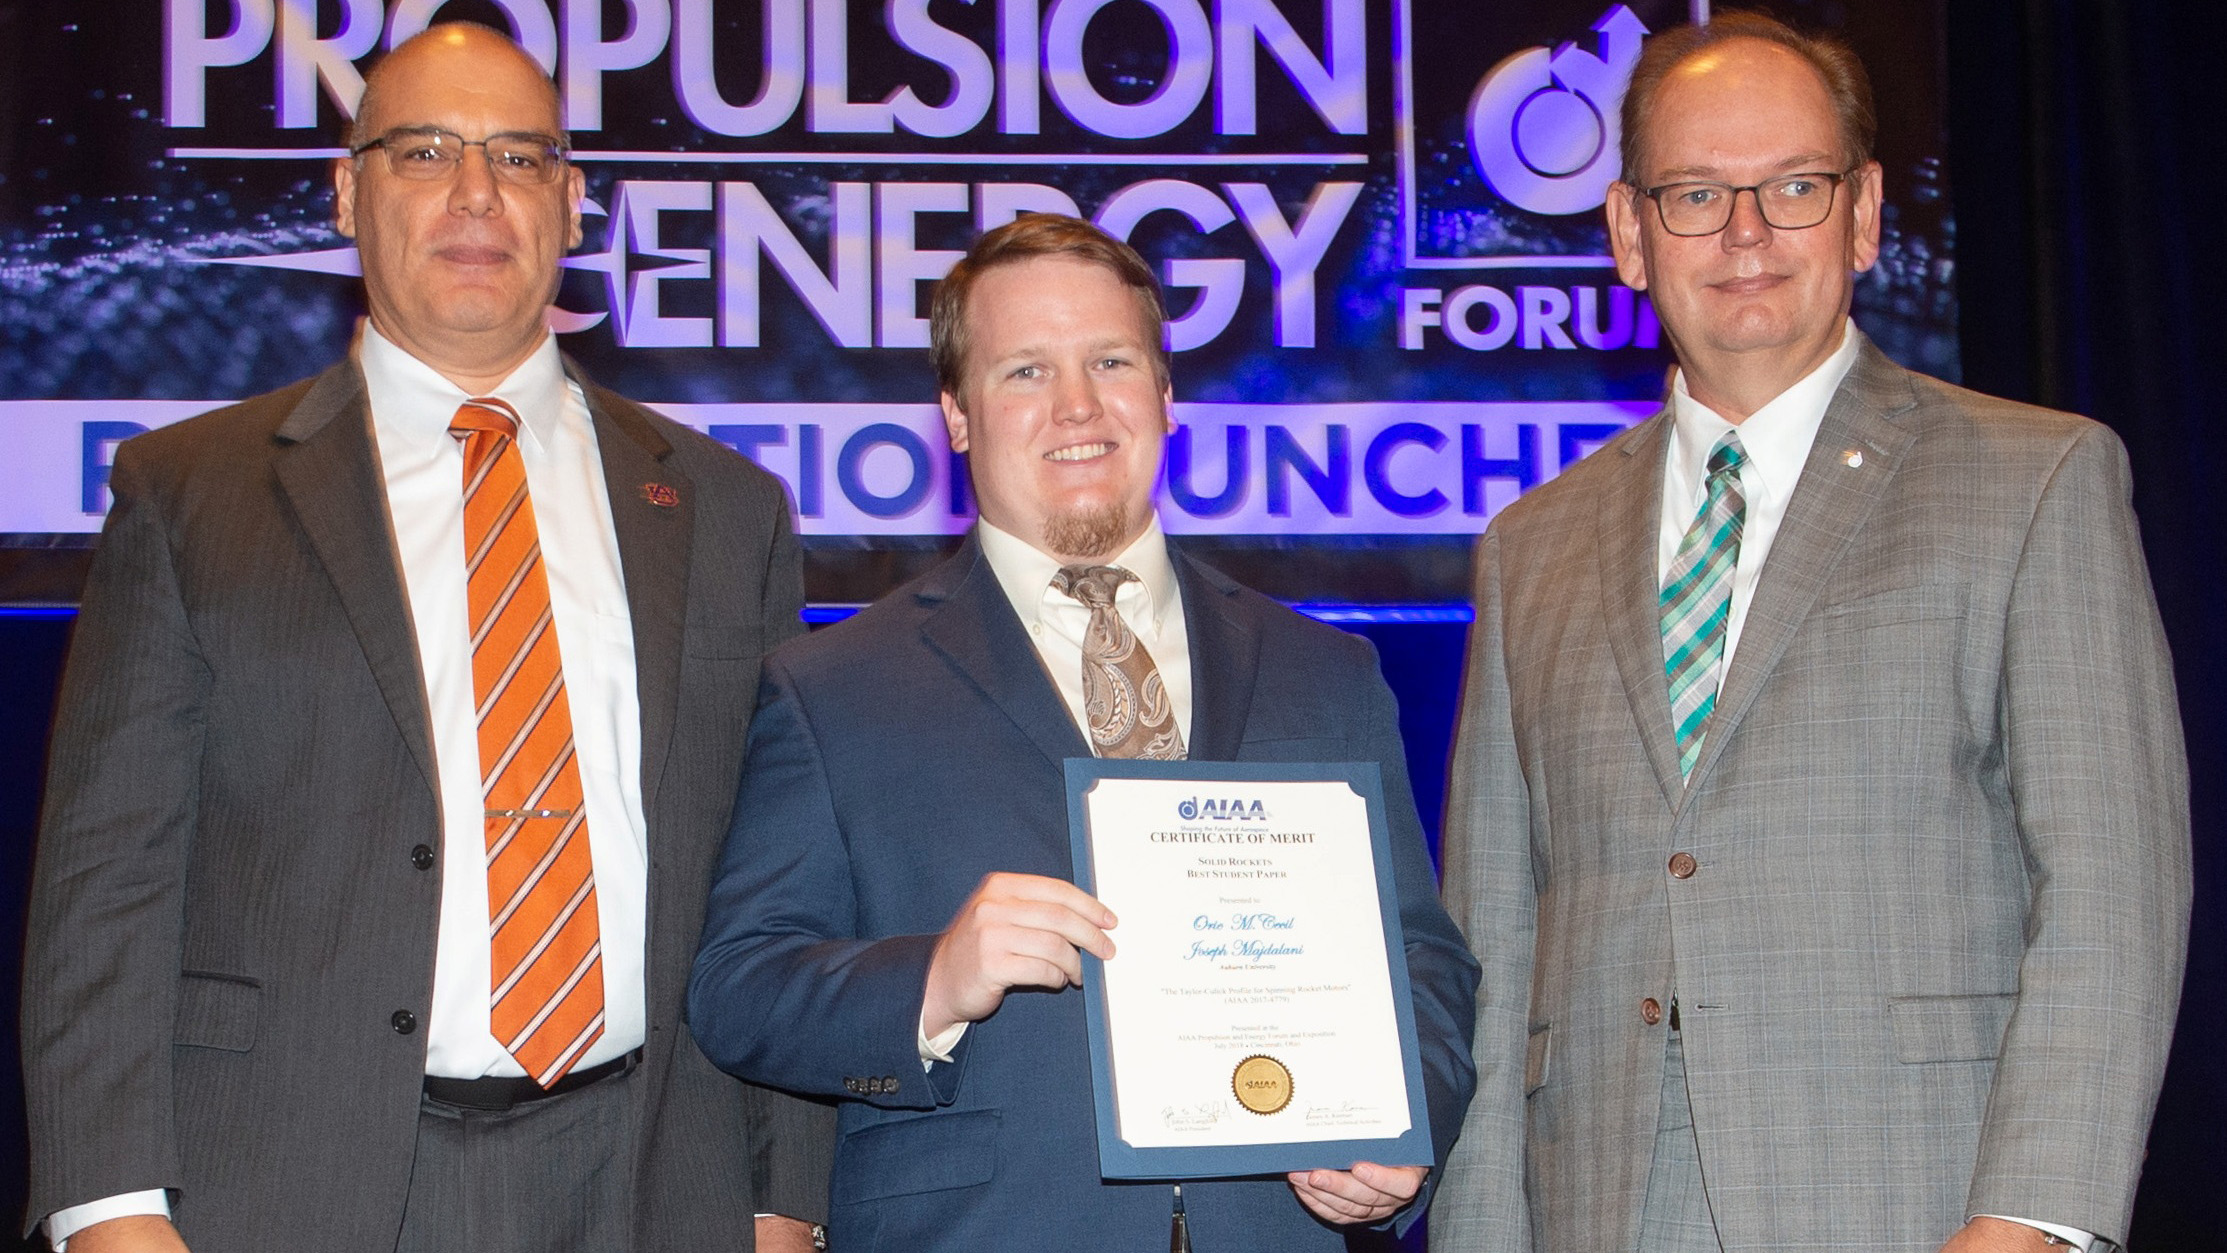 Professor Joe Majdalani and AE graduate student Orie Cecil receive the Solid Rockets Best Student Paper award from Propulsion Director Jeff Hamstra at the Propulsion and Energy Forum in Cincinnati.